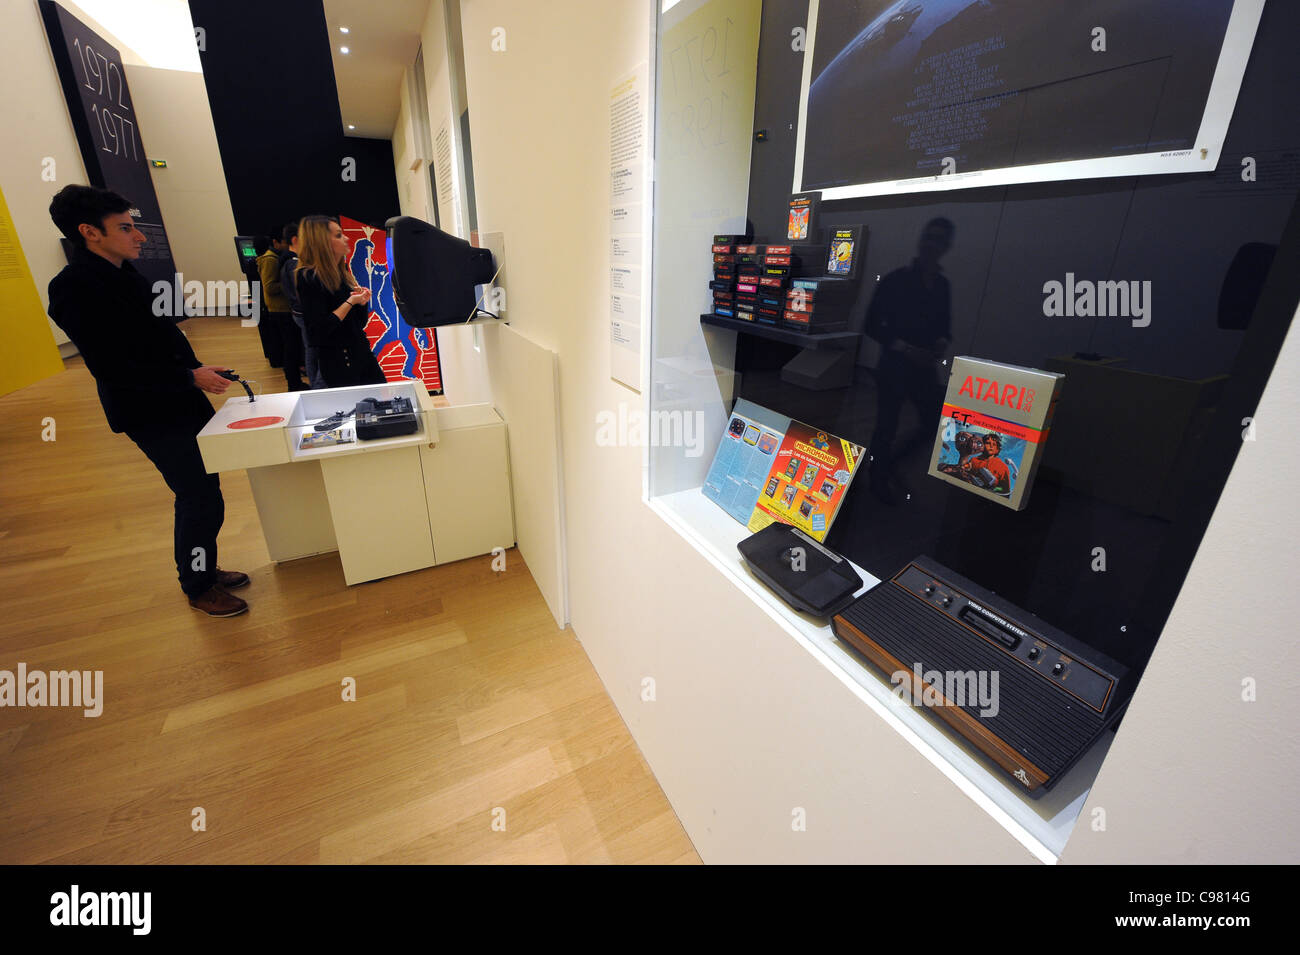 Exhibition about the history of video games in the Grand Palais gallery in Paris, France Stock Photo